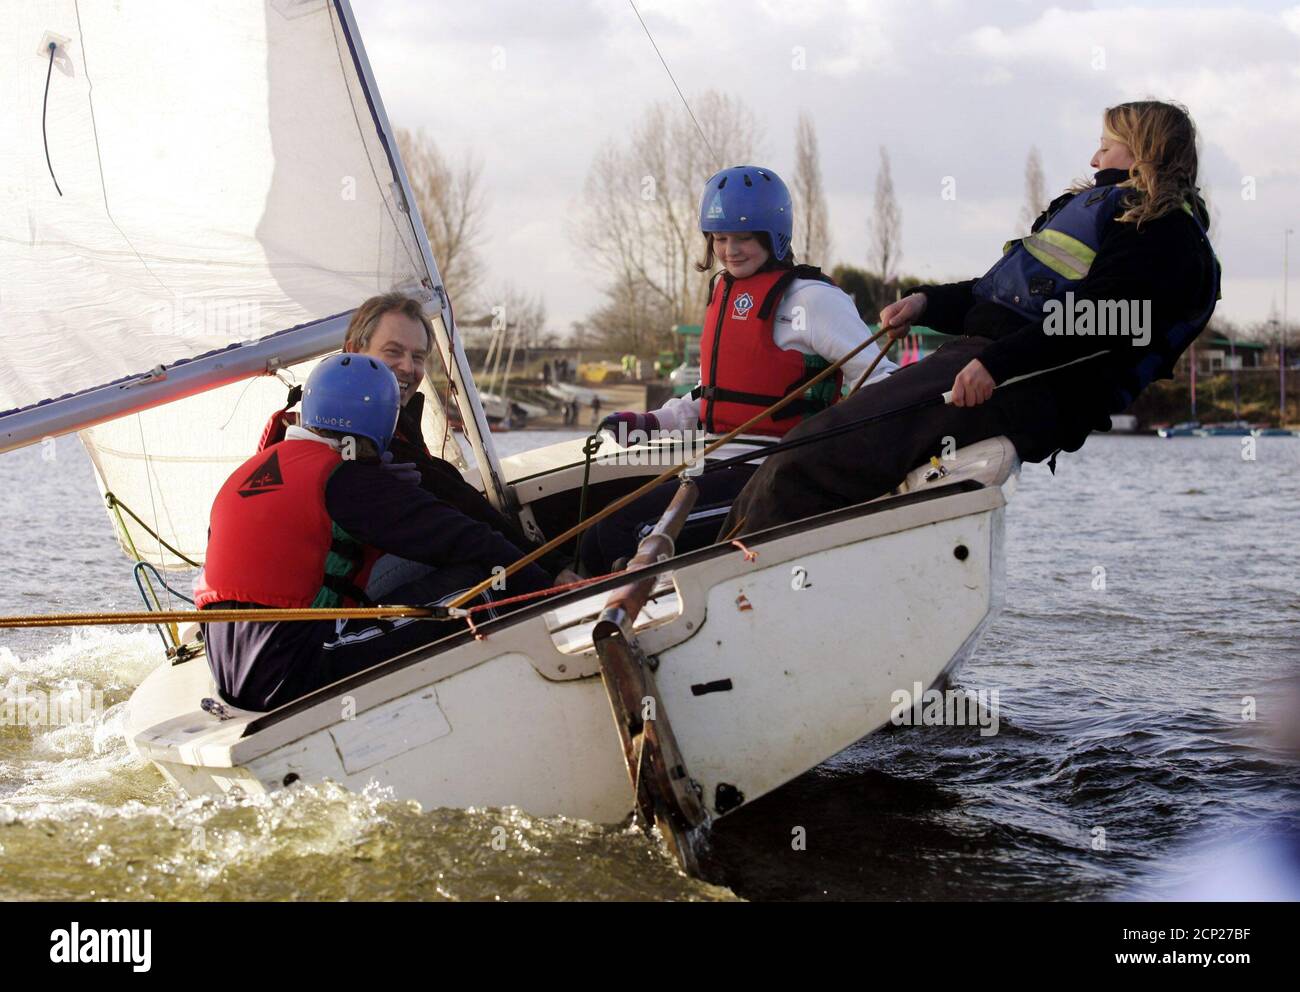 Britain's Prime Minister Blair sails on a Wayfarer dinghy during a visit to  the Upton Warren outdoor education centre. Britain's Prime Minister Tony  Blair (2nd L) sails on a Wayfarer dinghy during